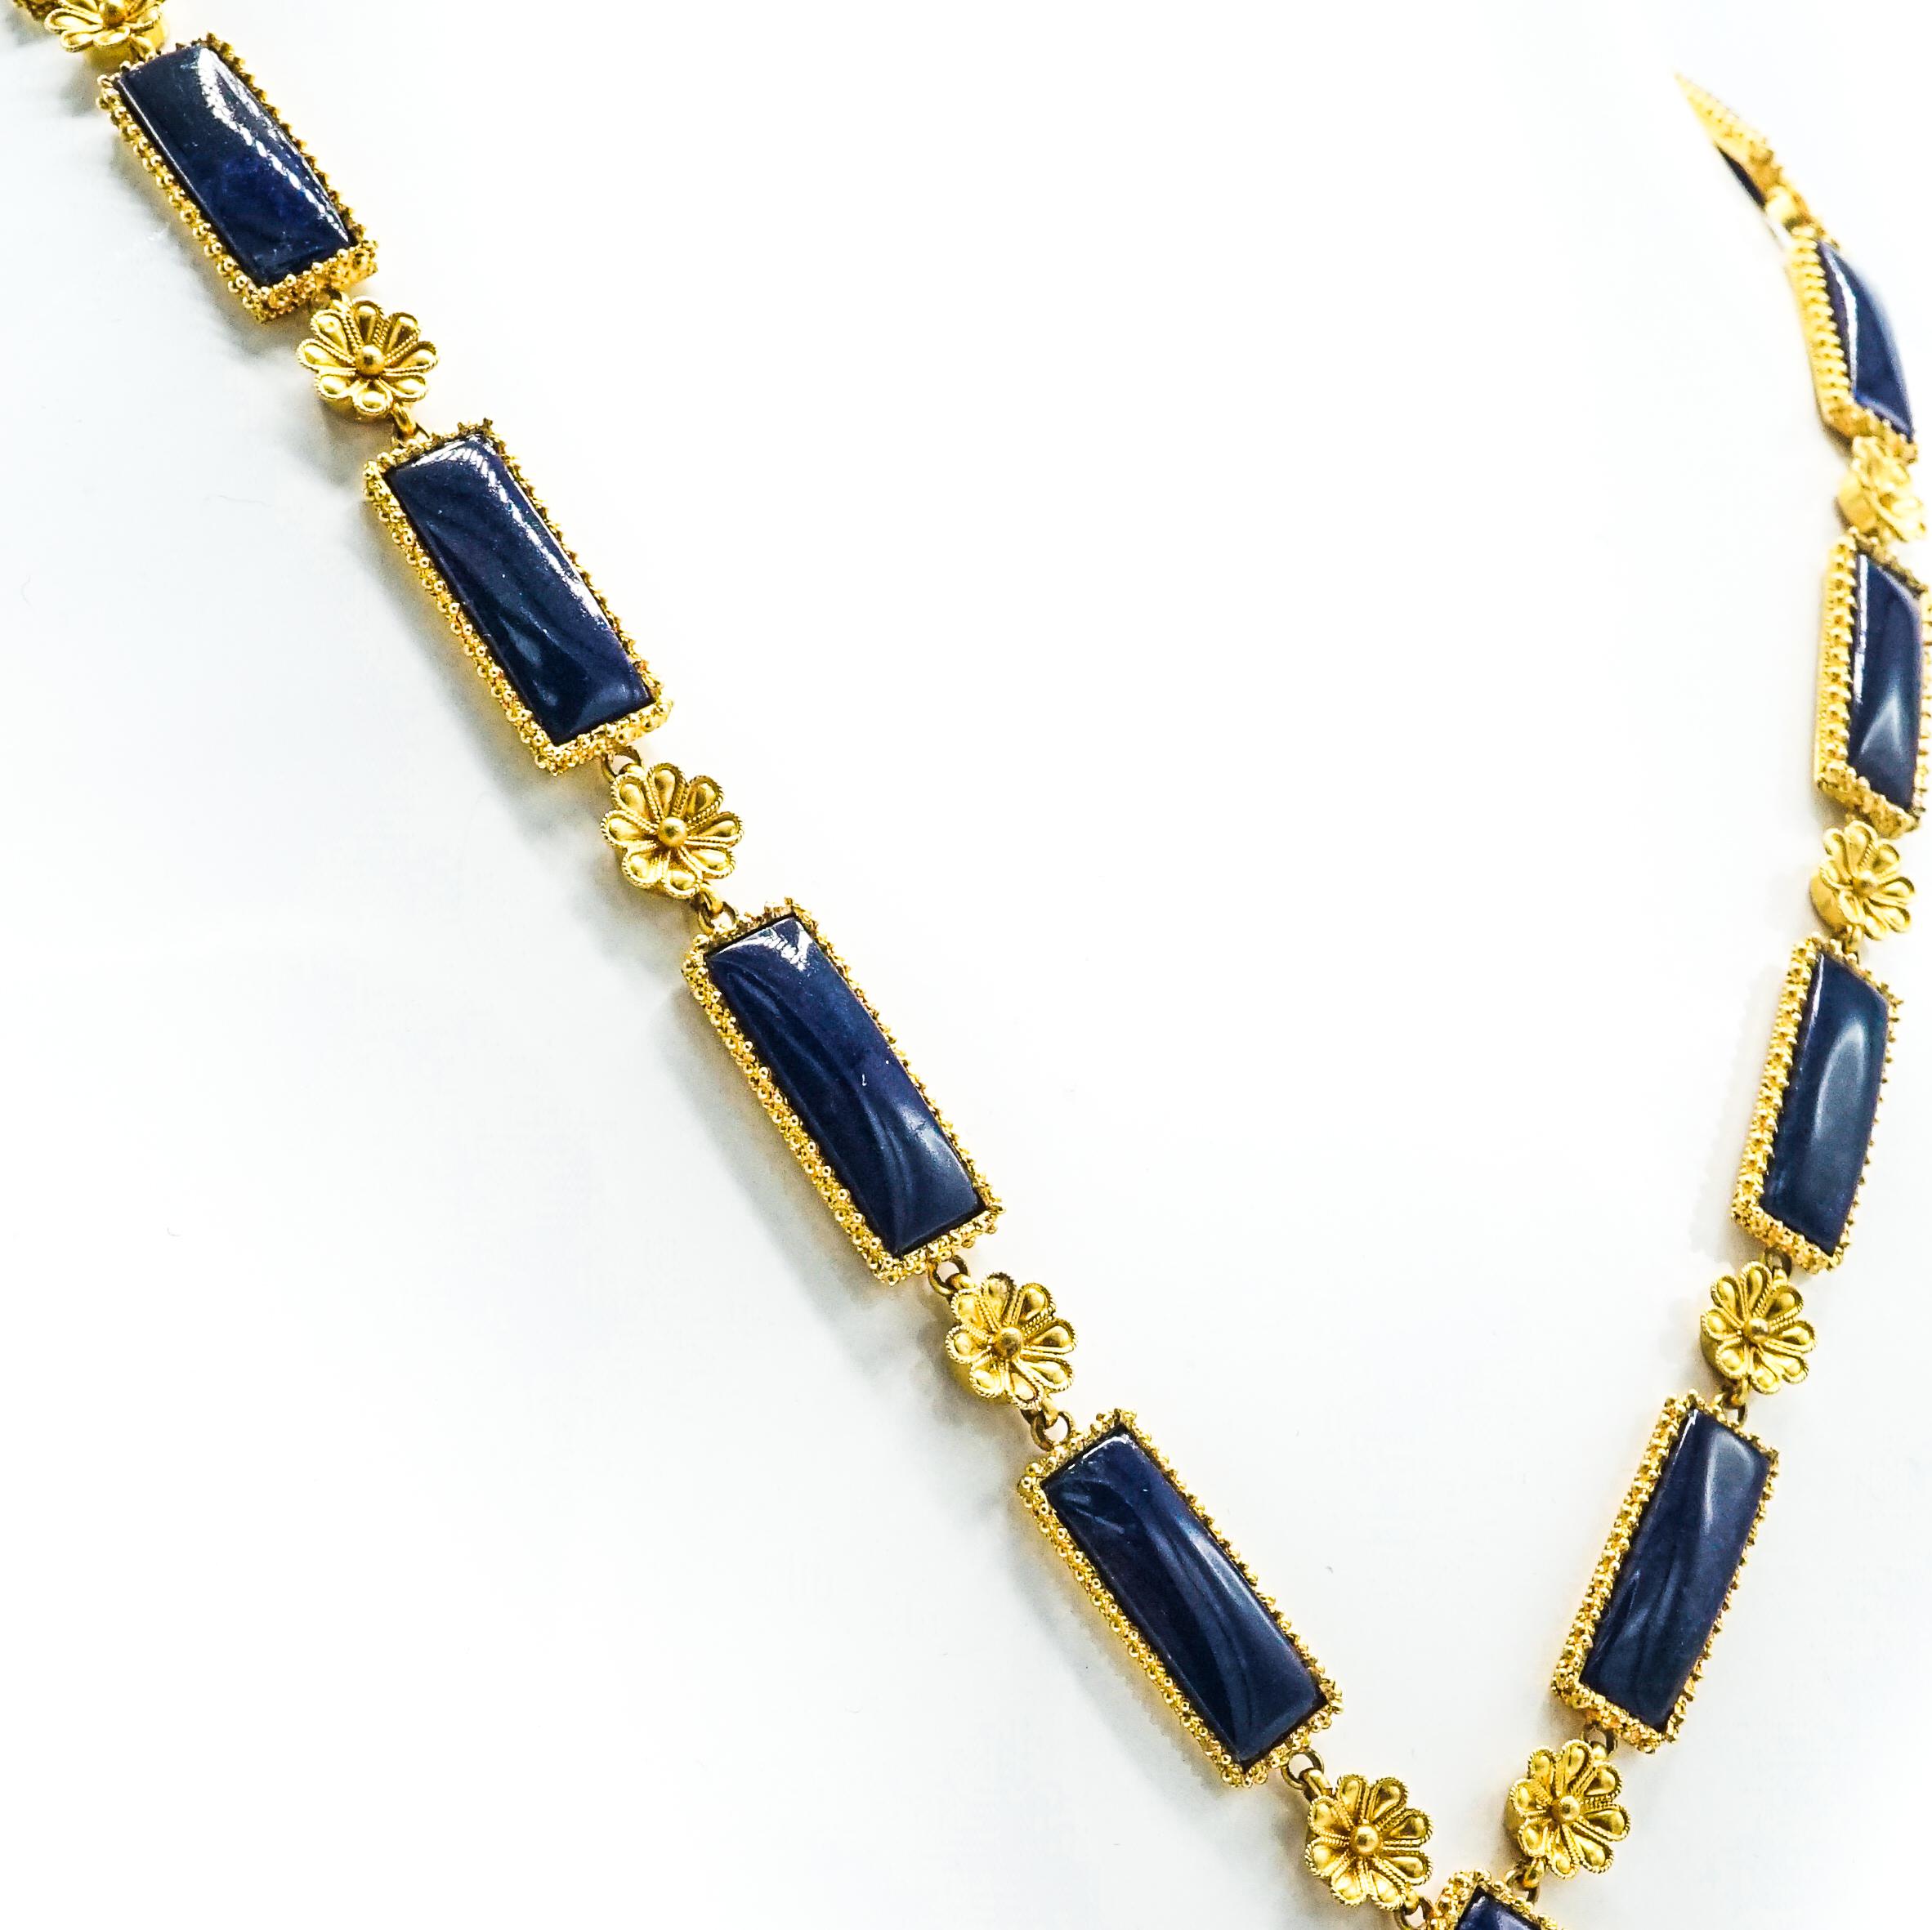 Llias Lalounis 22 Karat Gold and Sodalite Pendant-Necklace In Excellent Condition For Sale In New York, NY